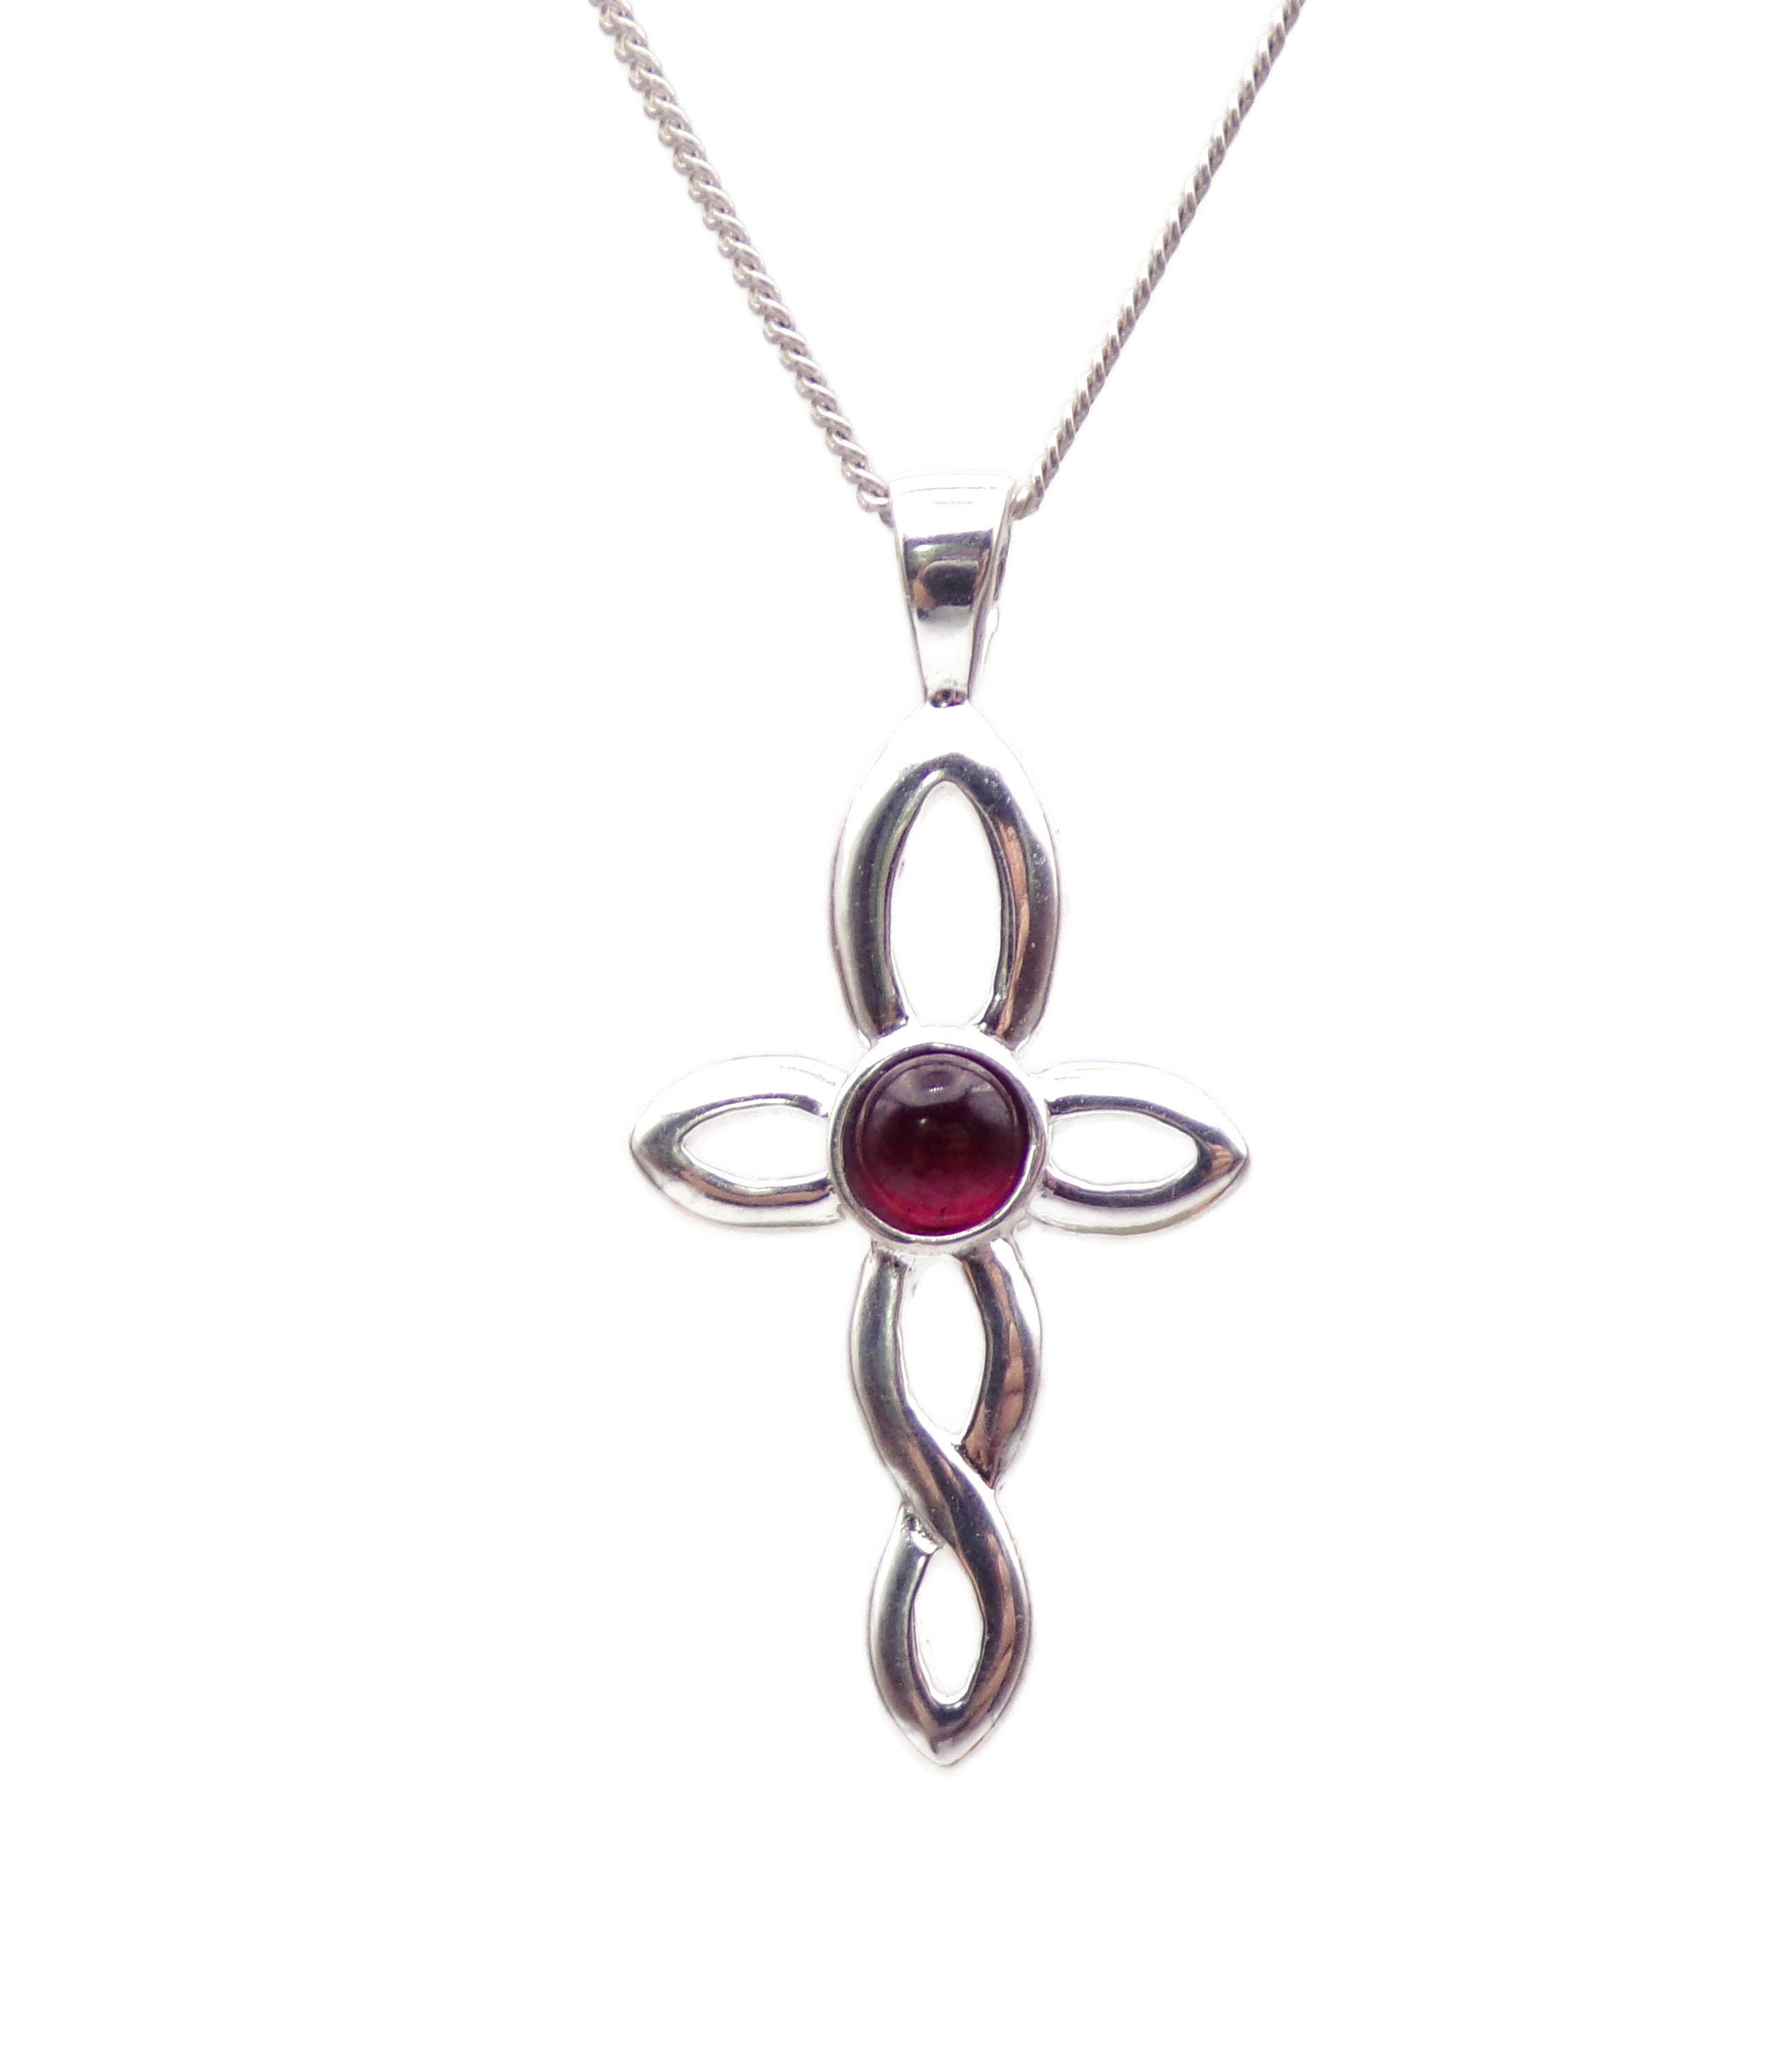 Brand New 925 Sterling Silver Celtic Cross with a Garnet Cabochon Necklace